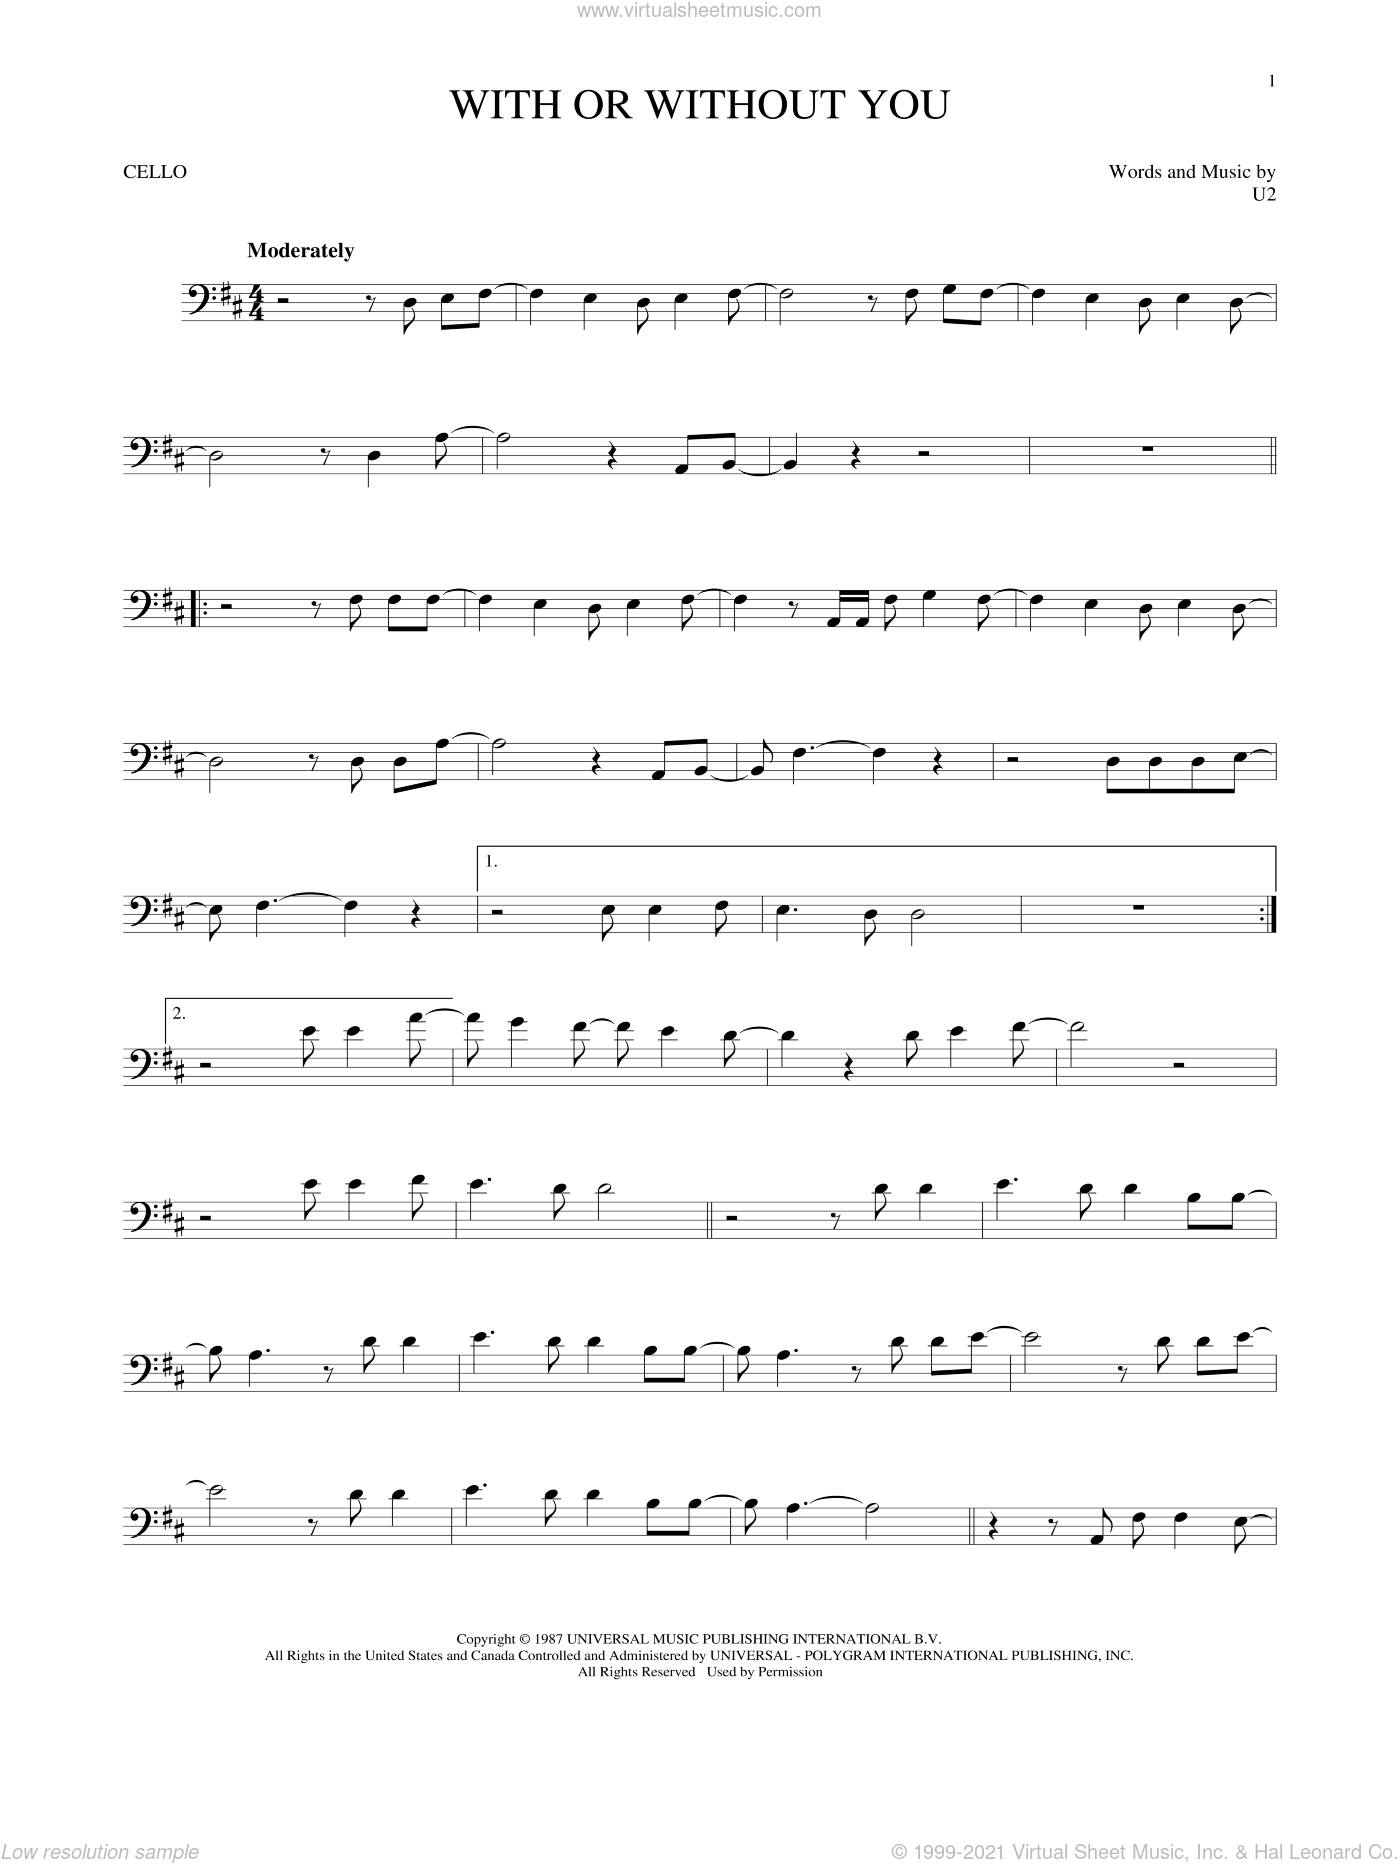 U2 - With Or Without You sheet music for cello solo [PDF]